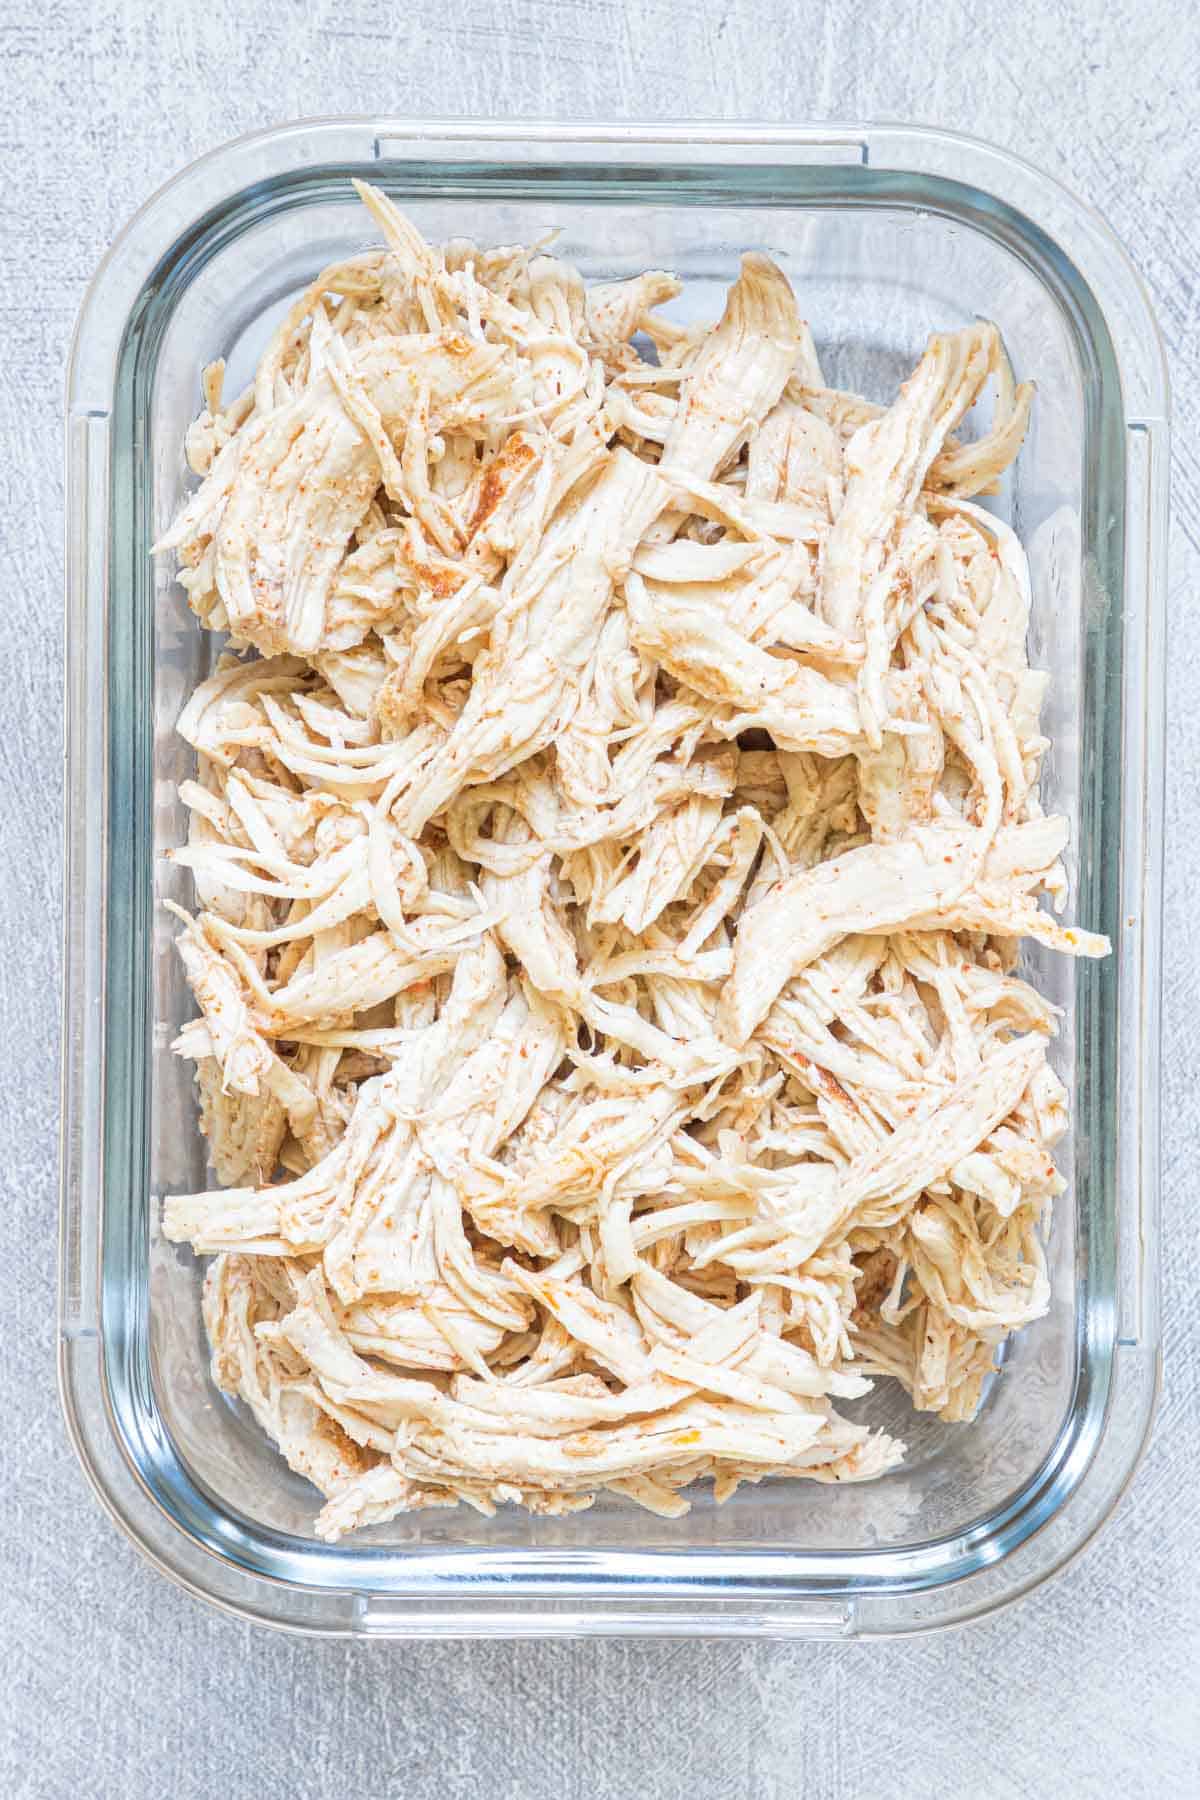 instant pot shredded chicken in a glass meal storage container